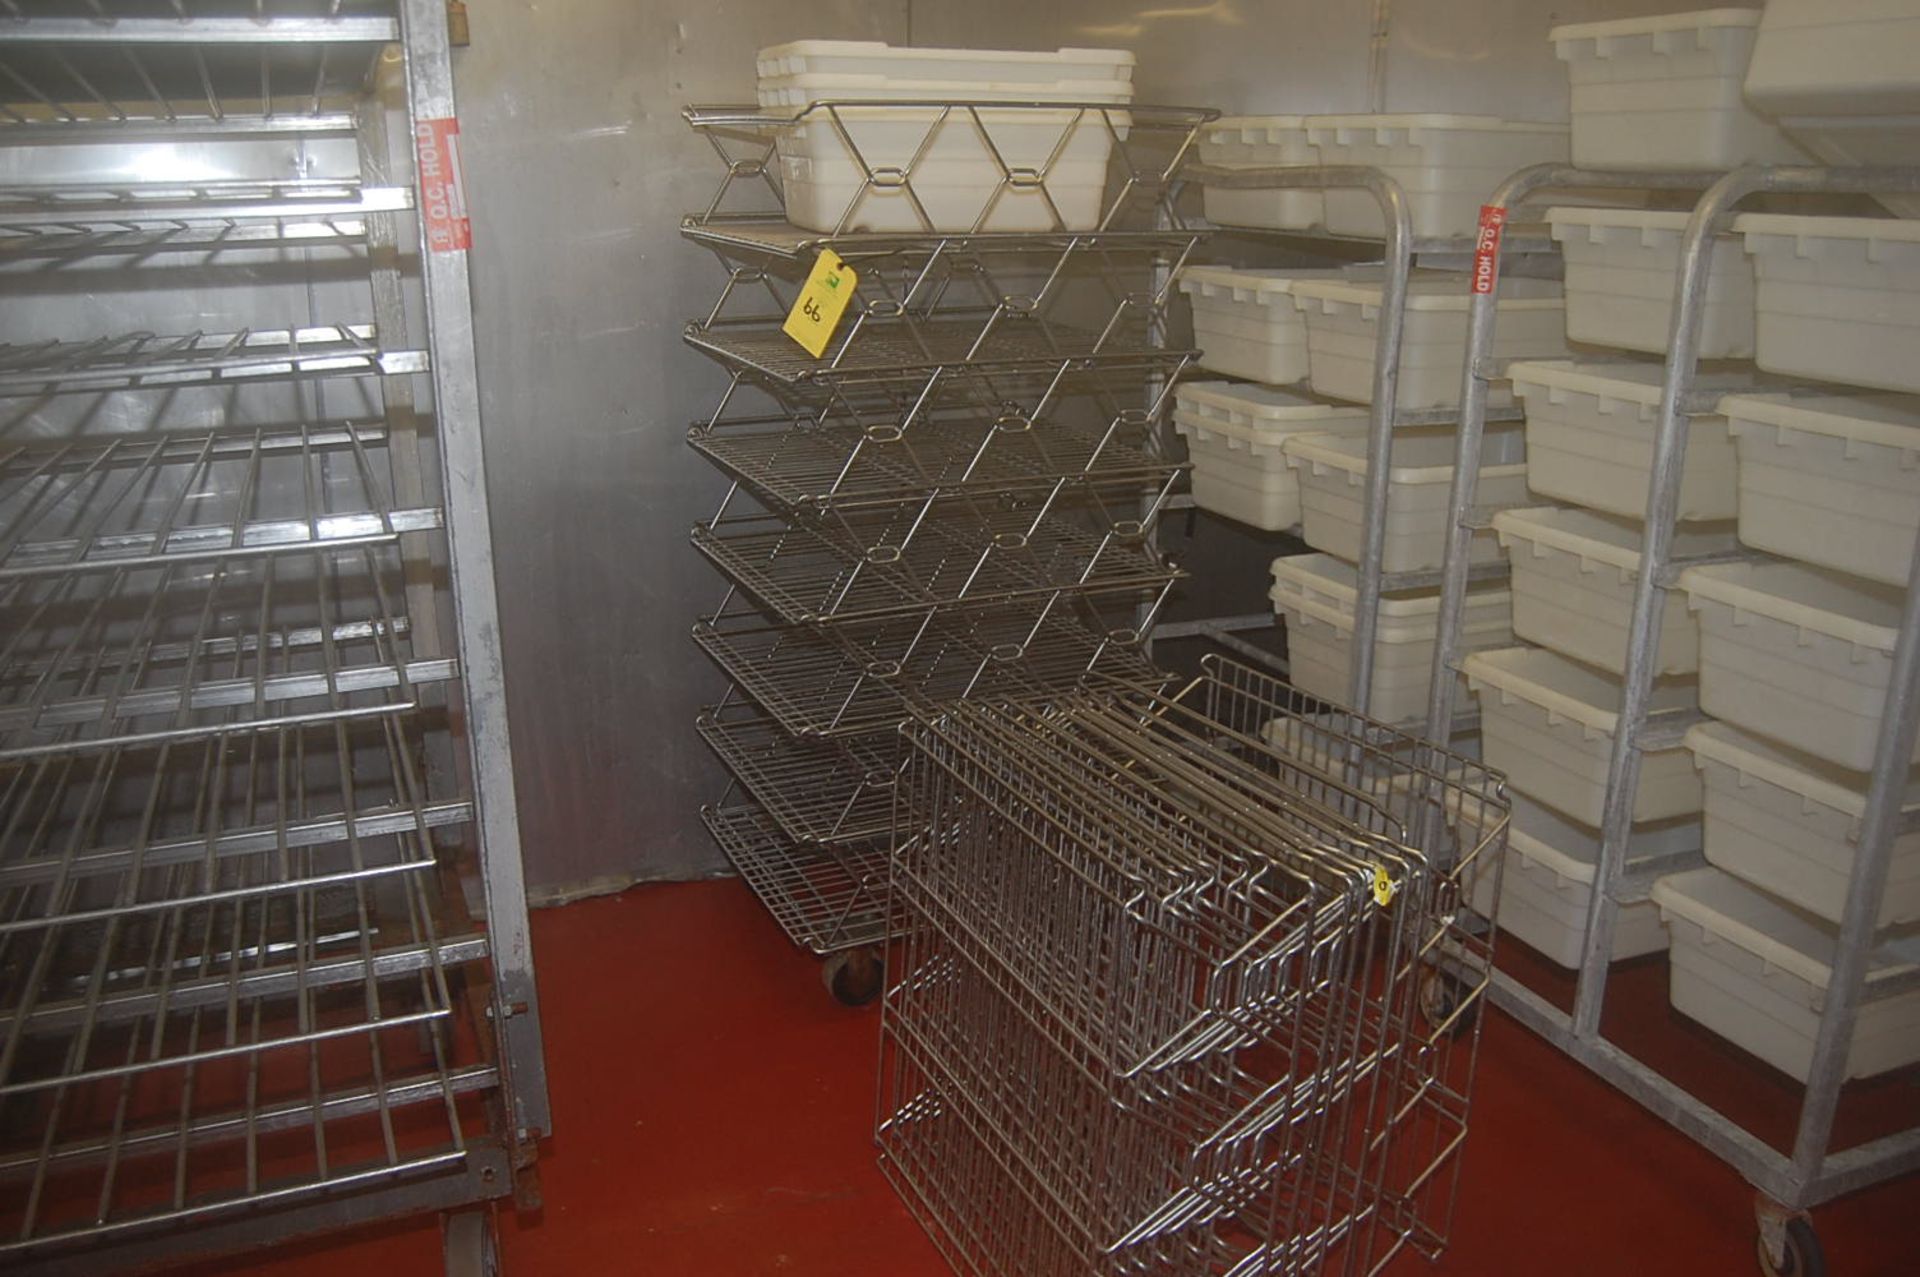 Stainless Steel Wire Shelf Unit Mounted on 4-Wheel Cart, Includes SS Wire Shelves, RIGGING FEE: $50